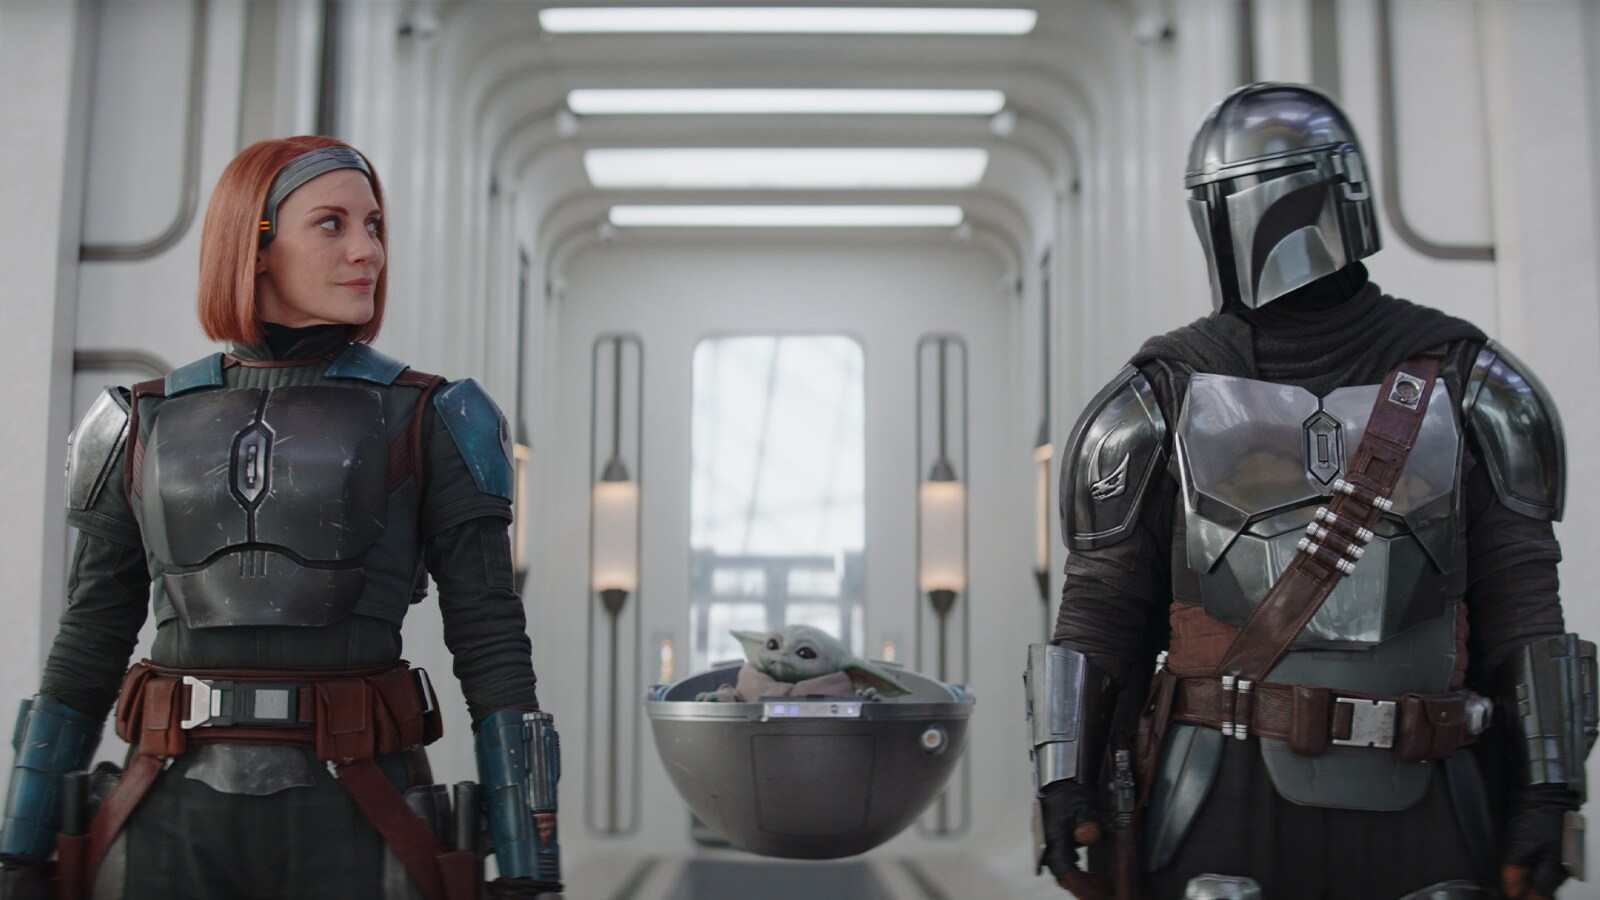 Quiz: Who Said the Quote from The Mandalorian?